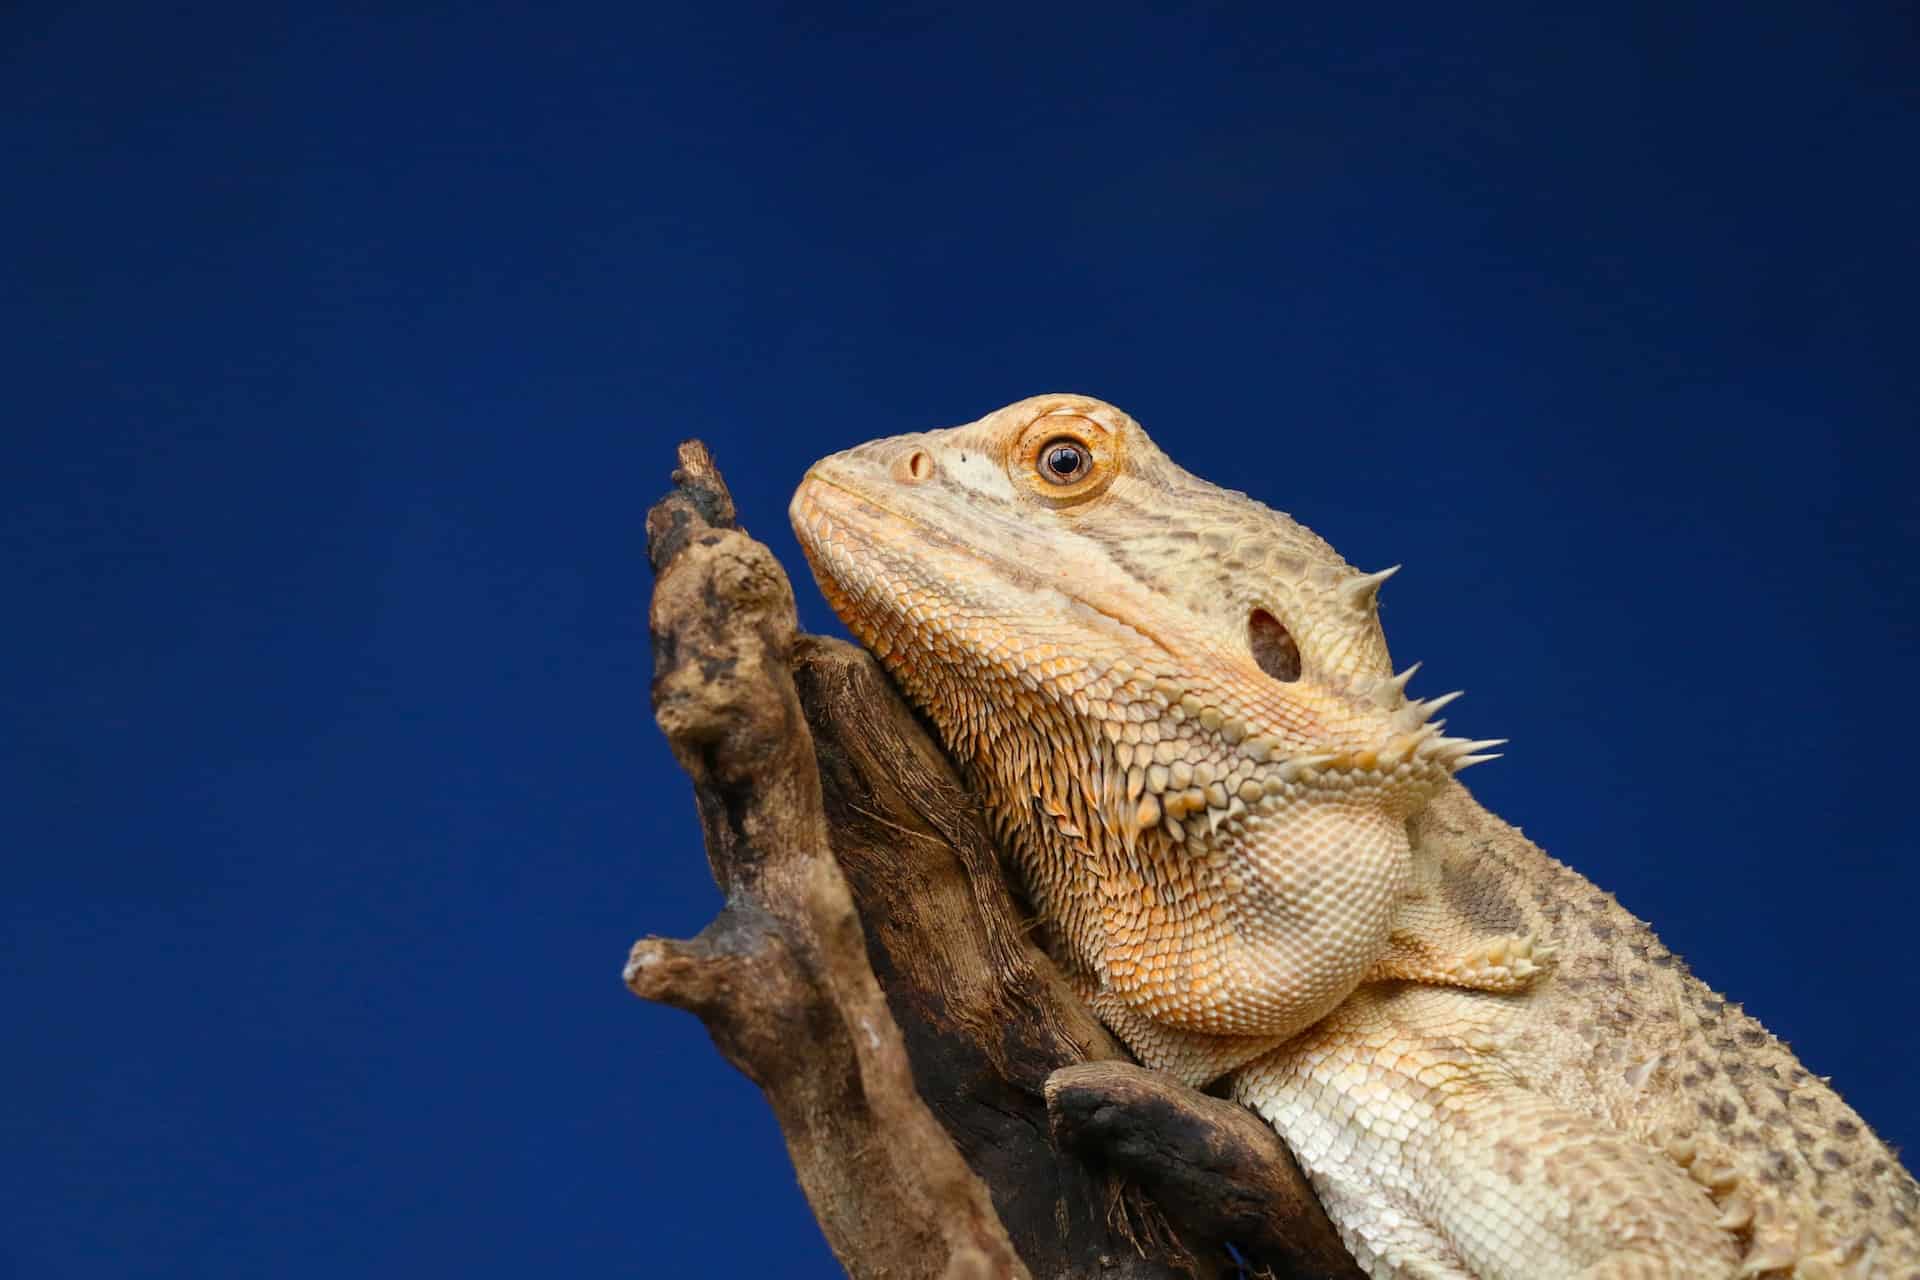 Are Bearded Dragons Good for Beginners?